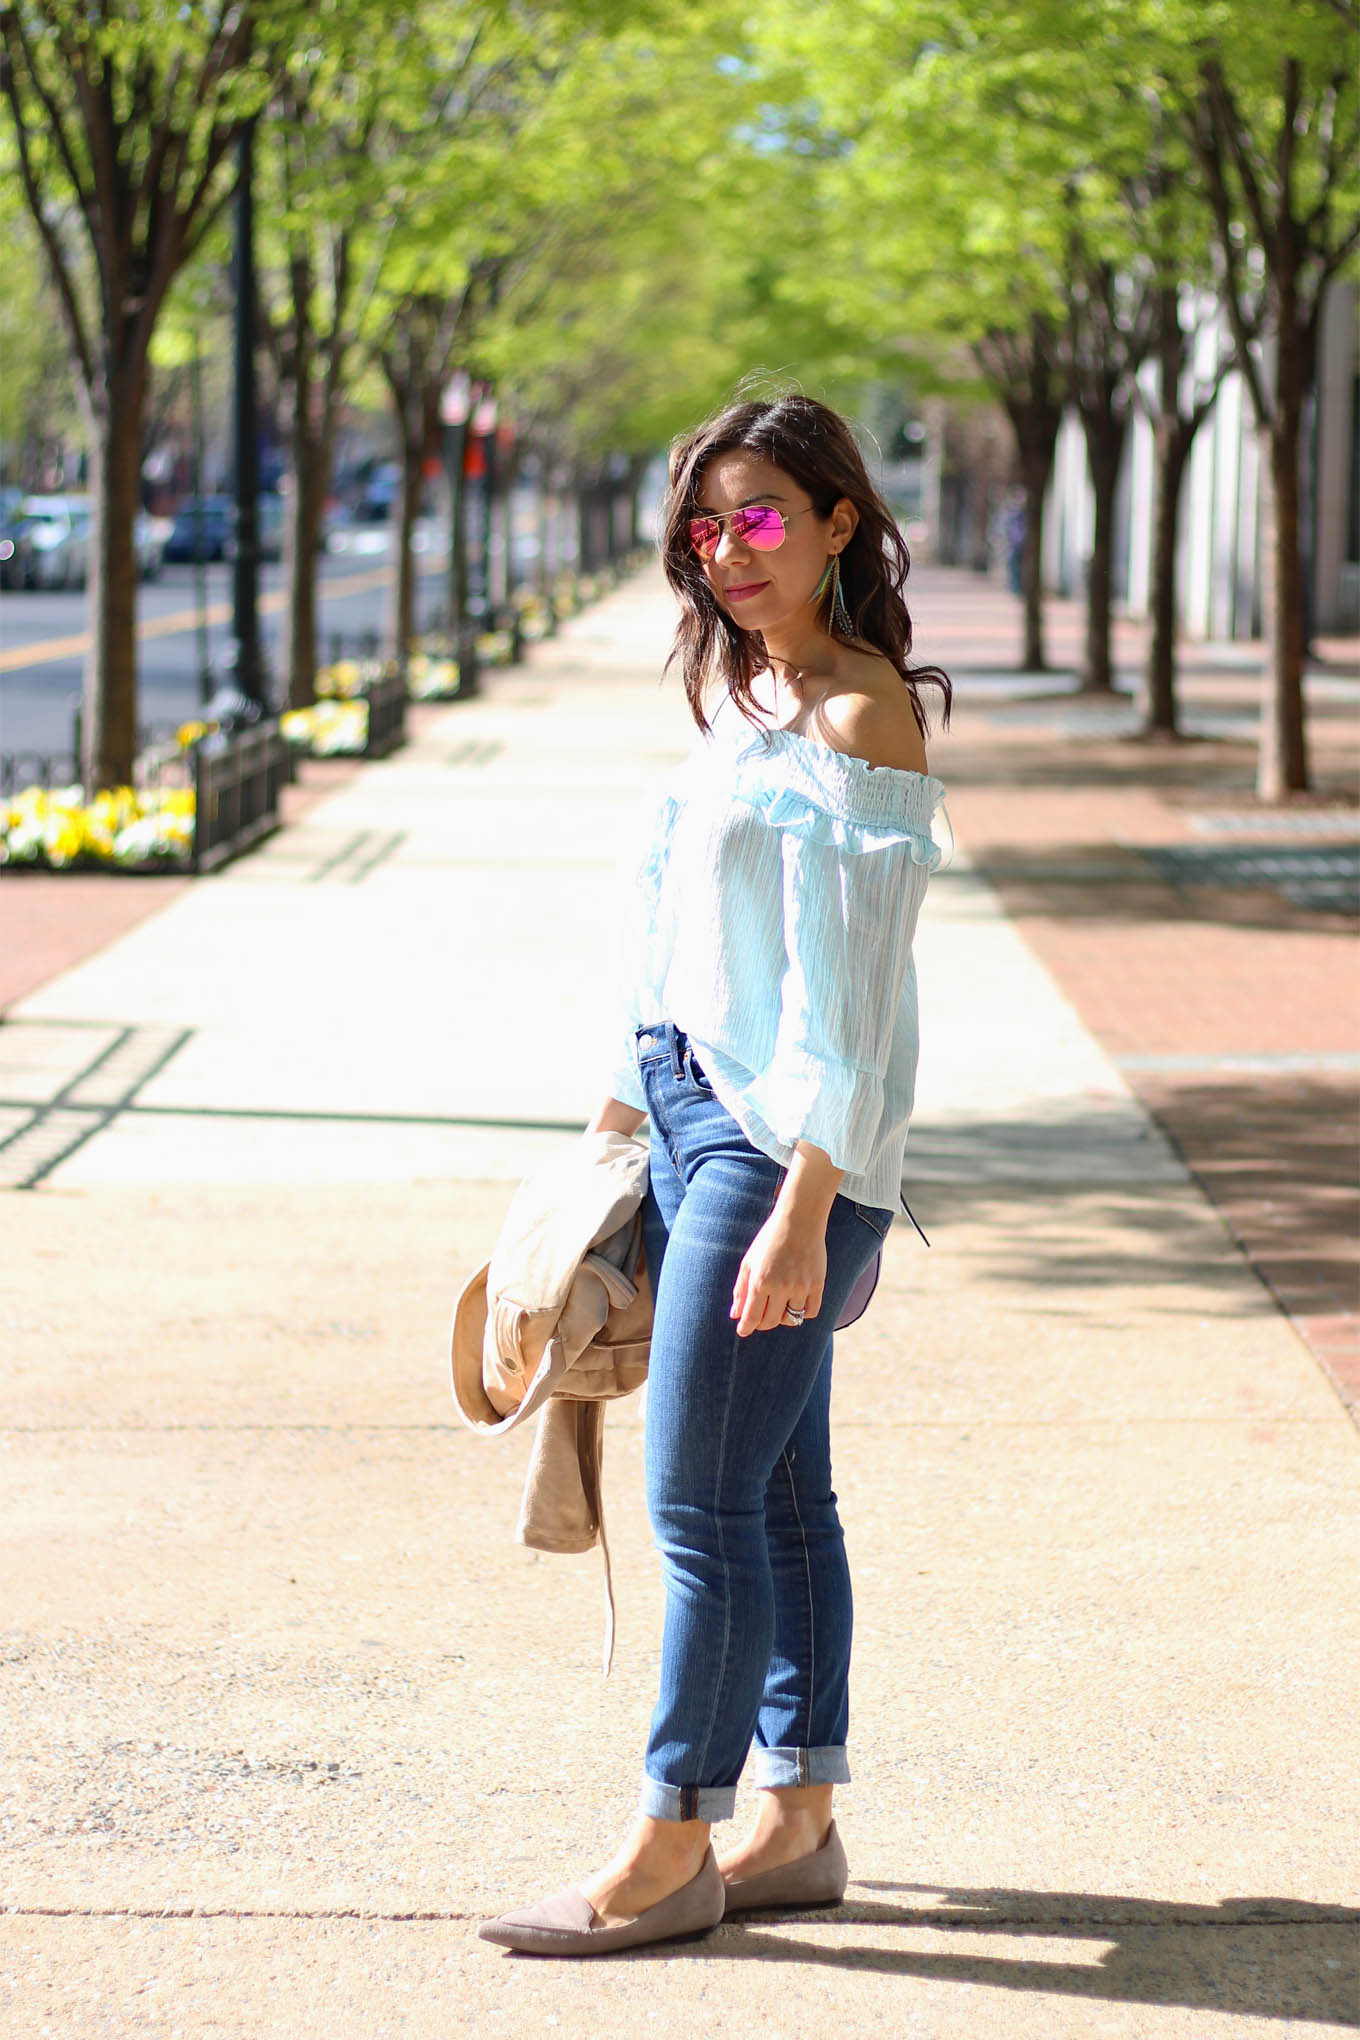 Lifestyle Blogger Roxanne of Glass of Glam wearing a sky blue sugarlips top, Tobi faux suede jacket, M.Gemi Flats, Madewell denim, and a Justfab bag